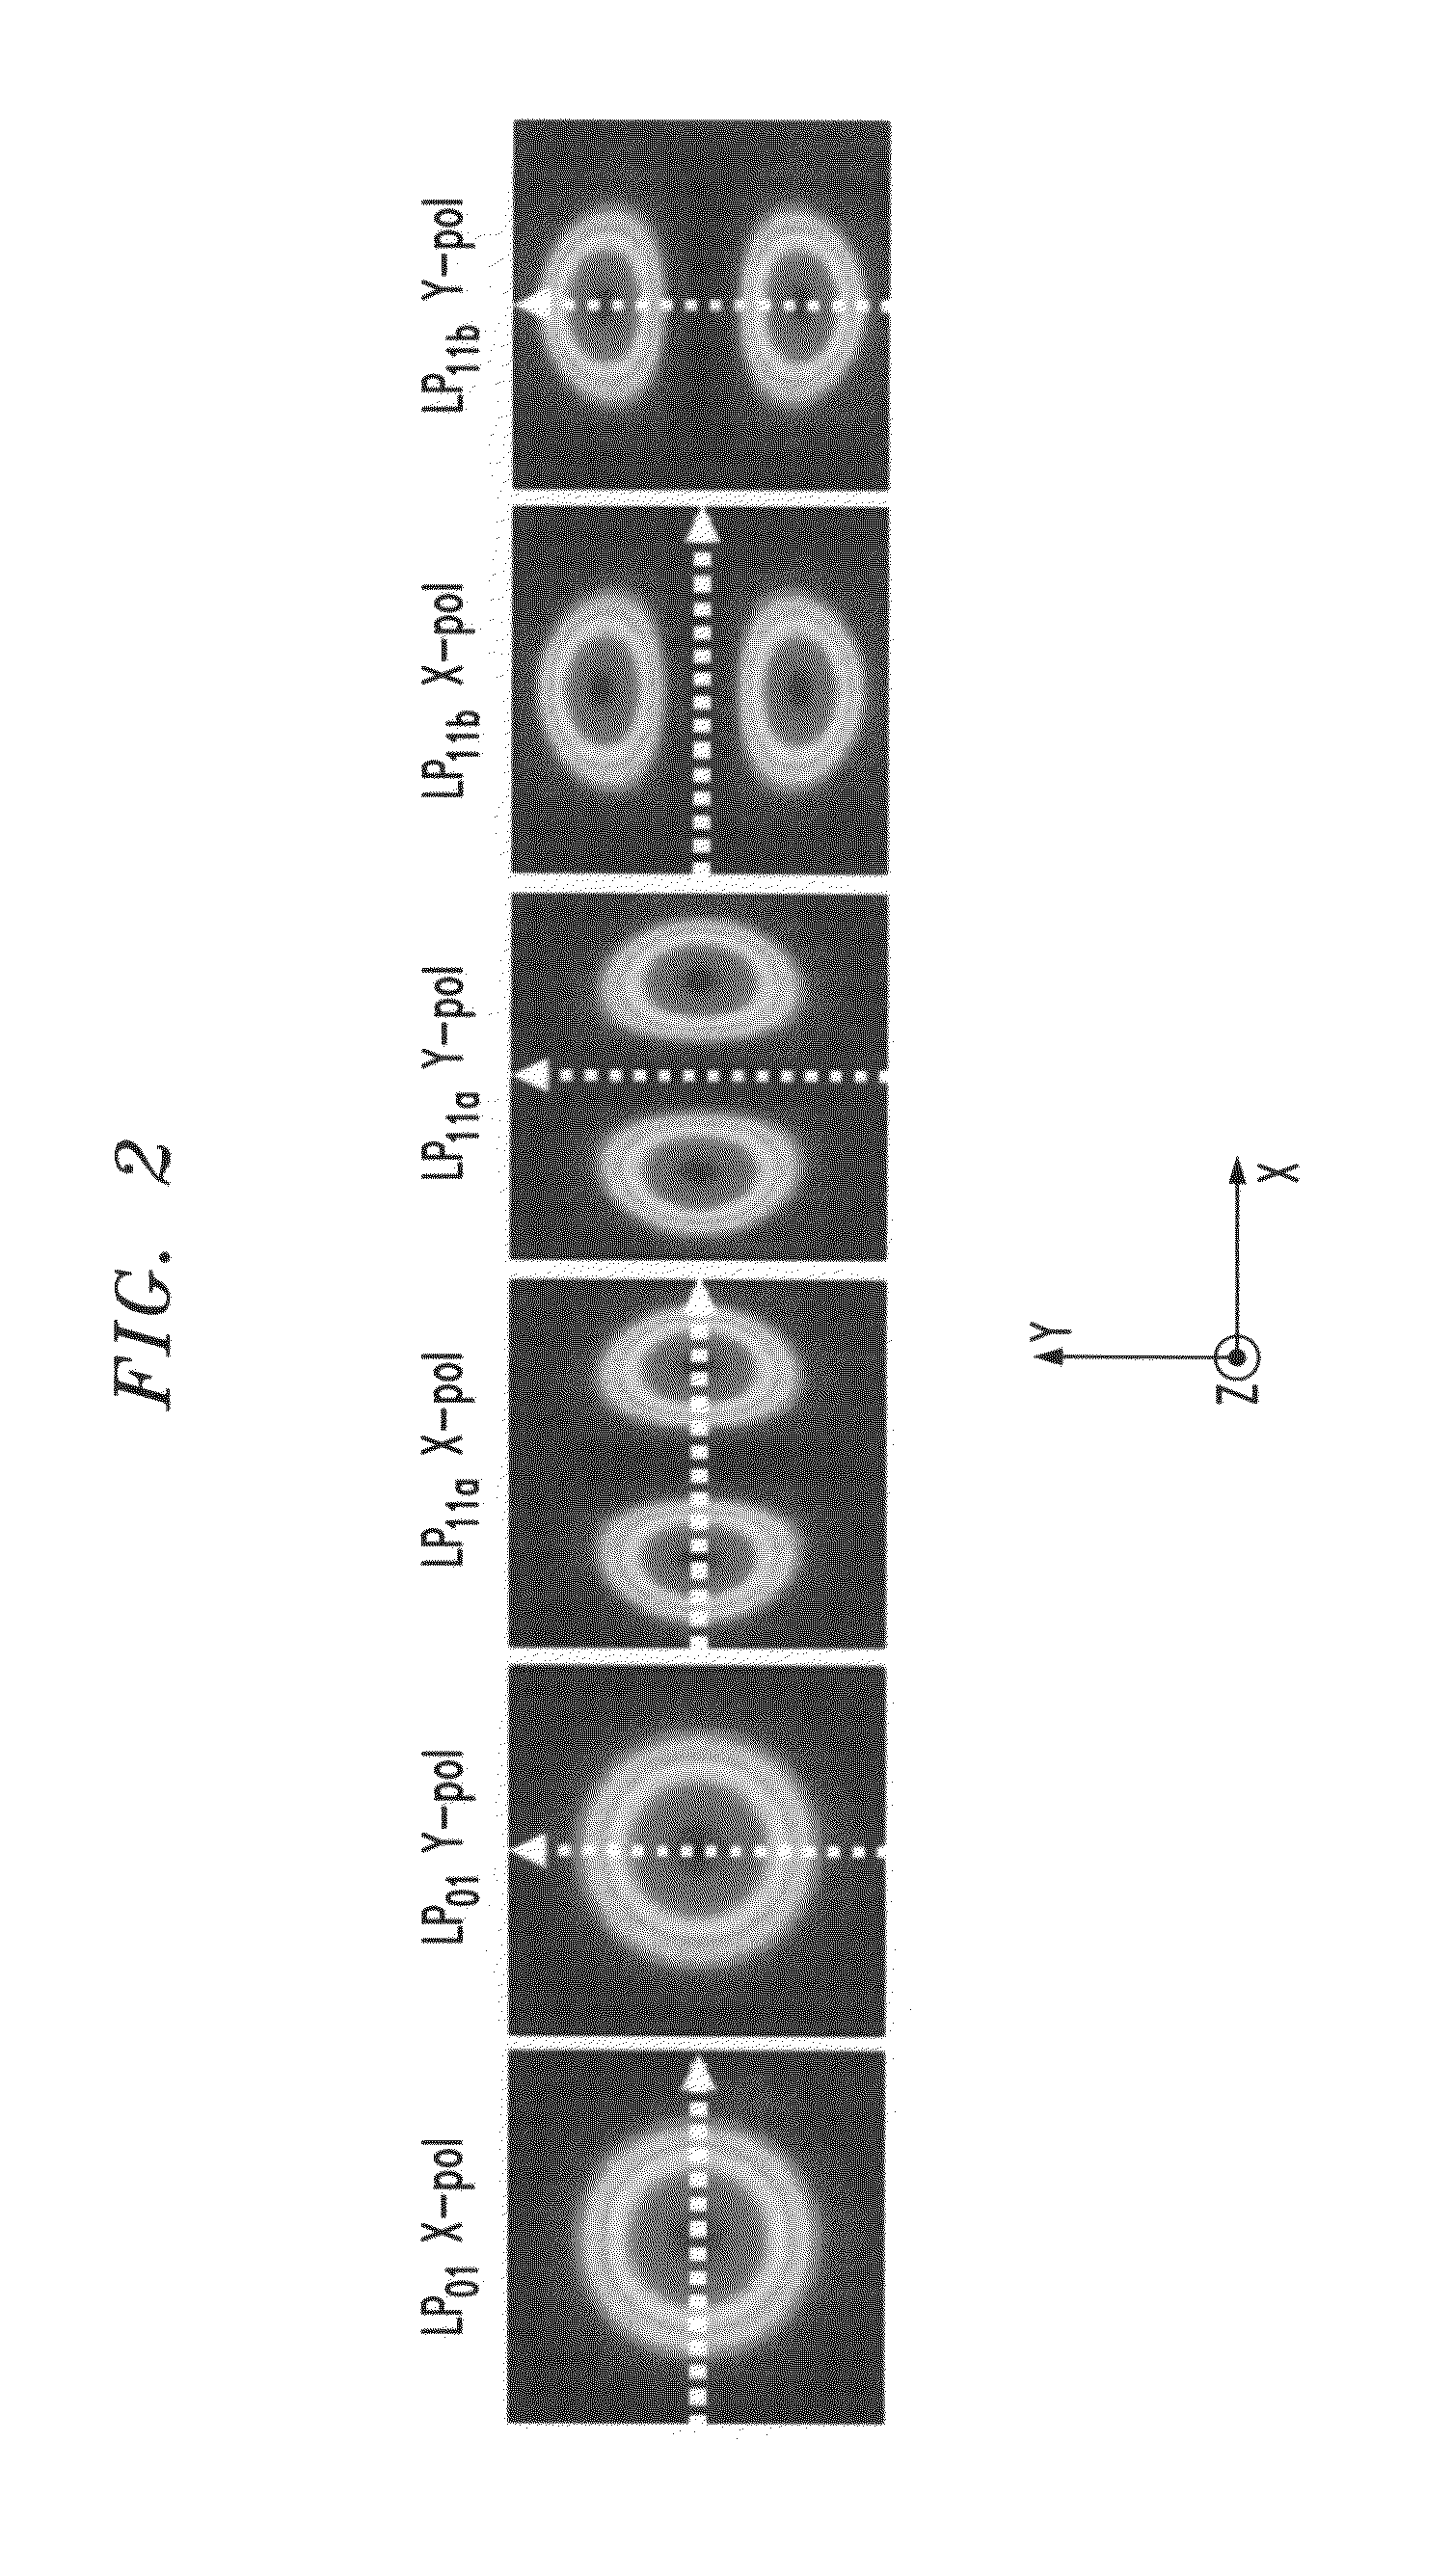 Intra-link spatial-mode mixing in an under-addressed optical MIMO system